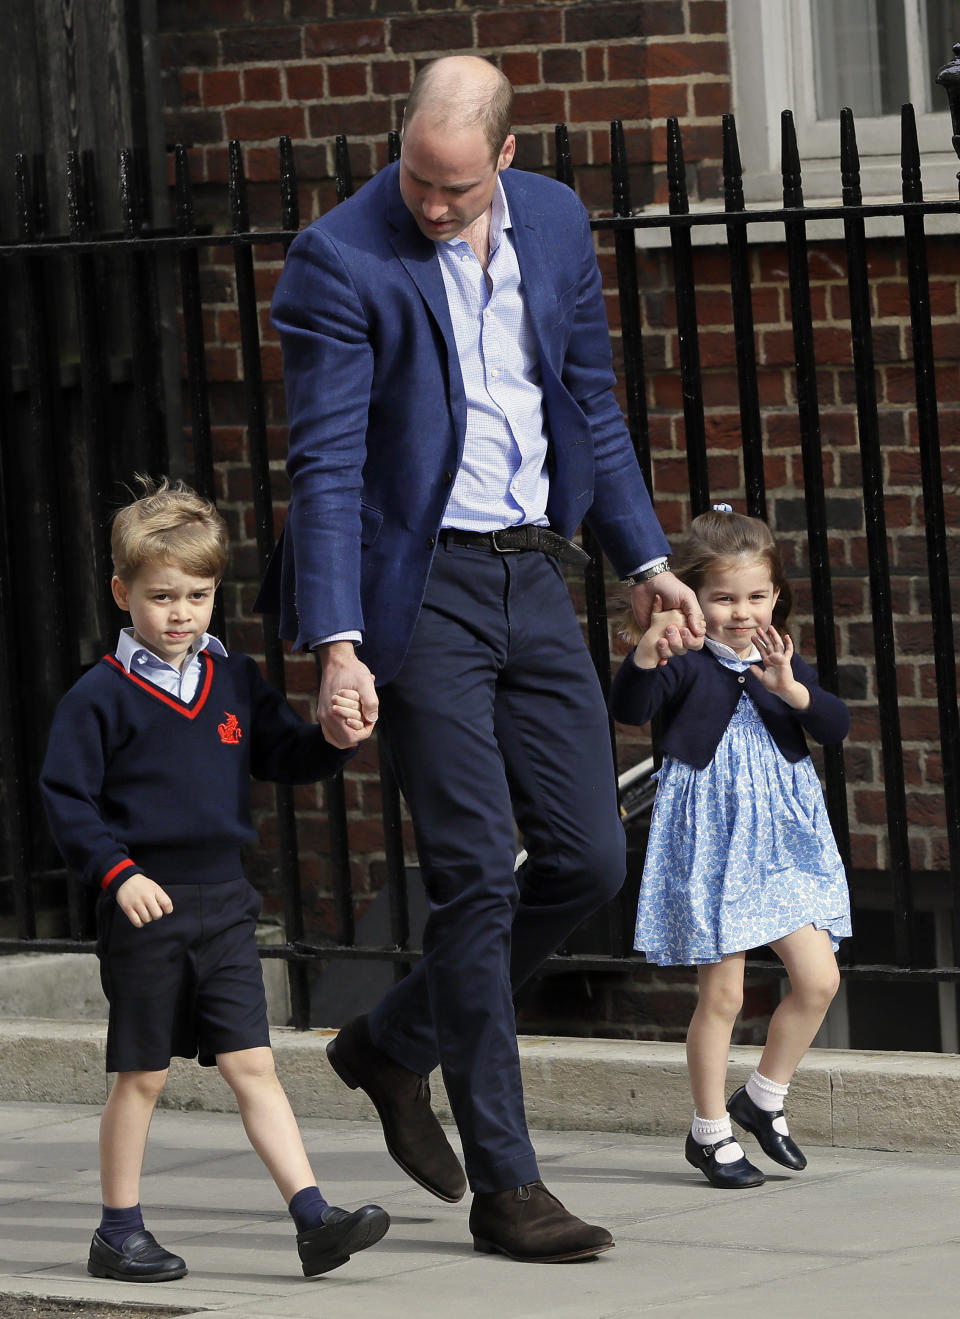 Prince William returns to St. Mary’s Hospital in London on Monday with Prince George and Princess Charlotte. (Photo: Kirsty Wigglesworth/AP)